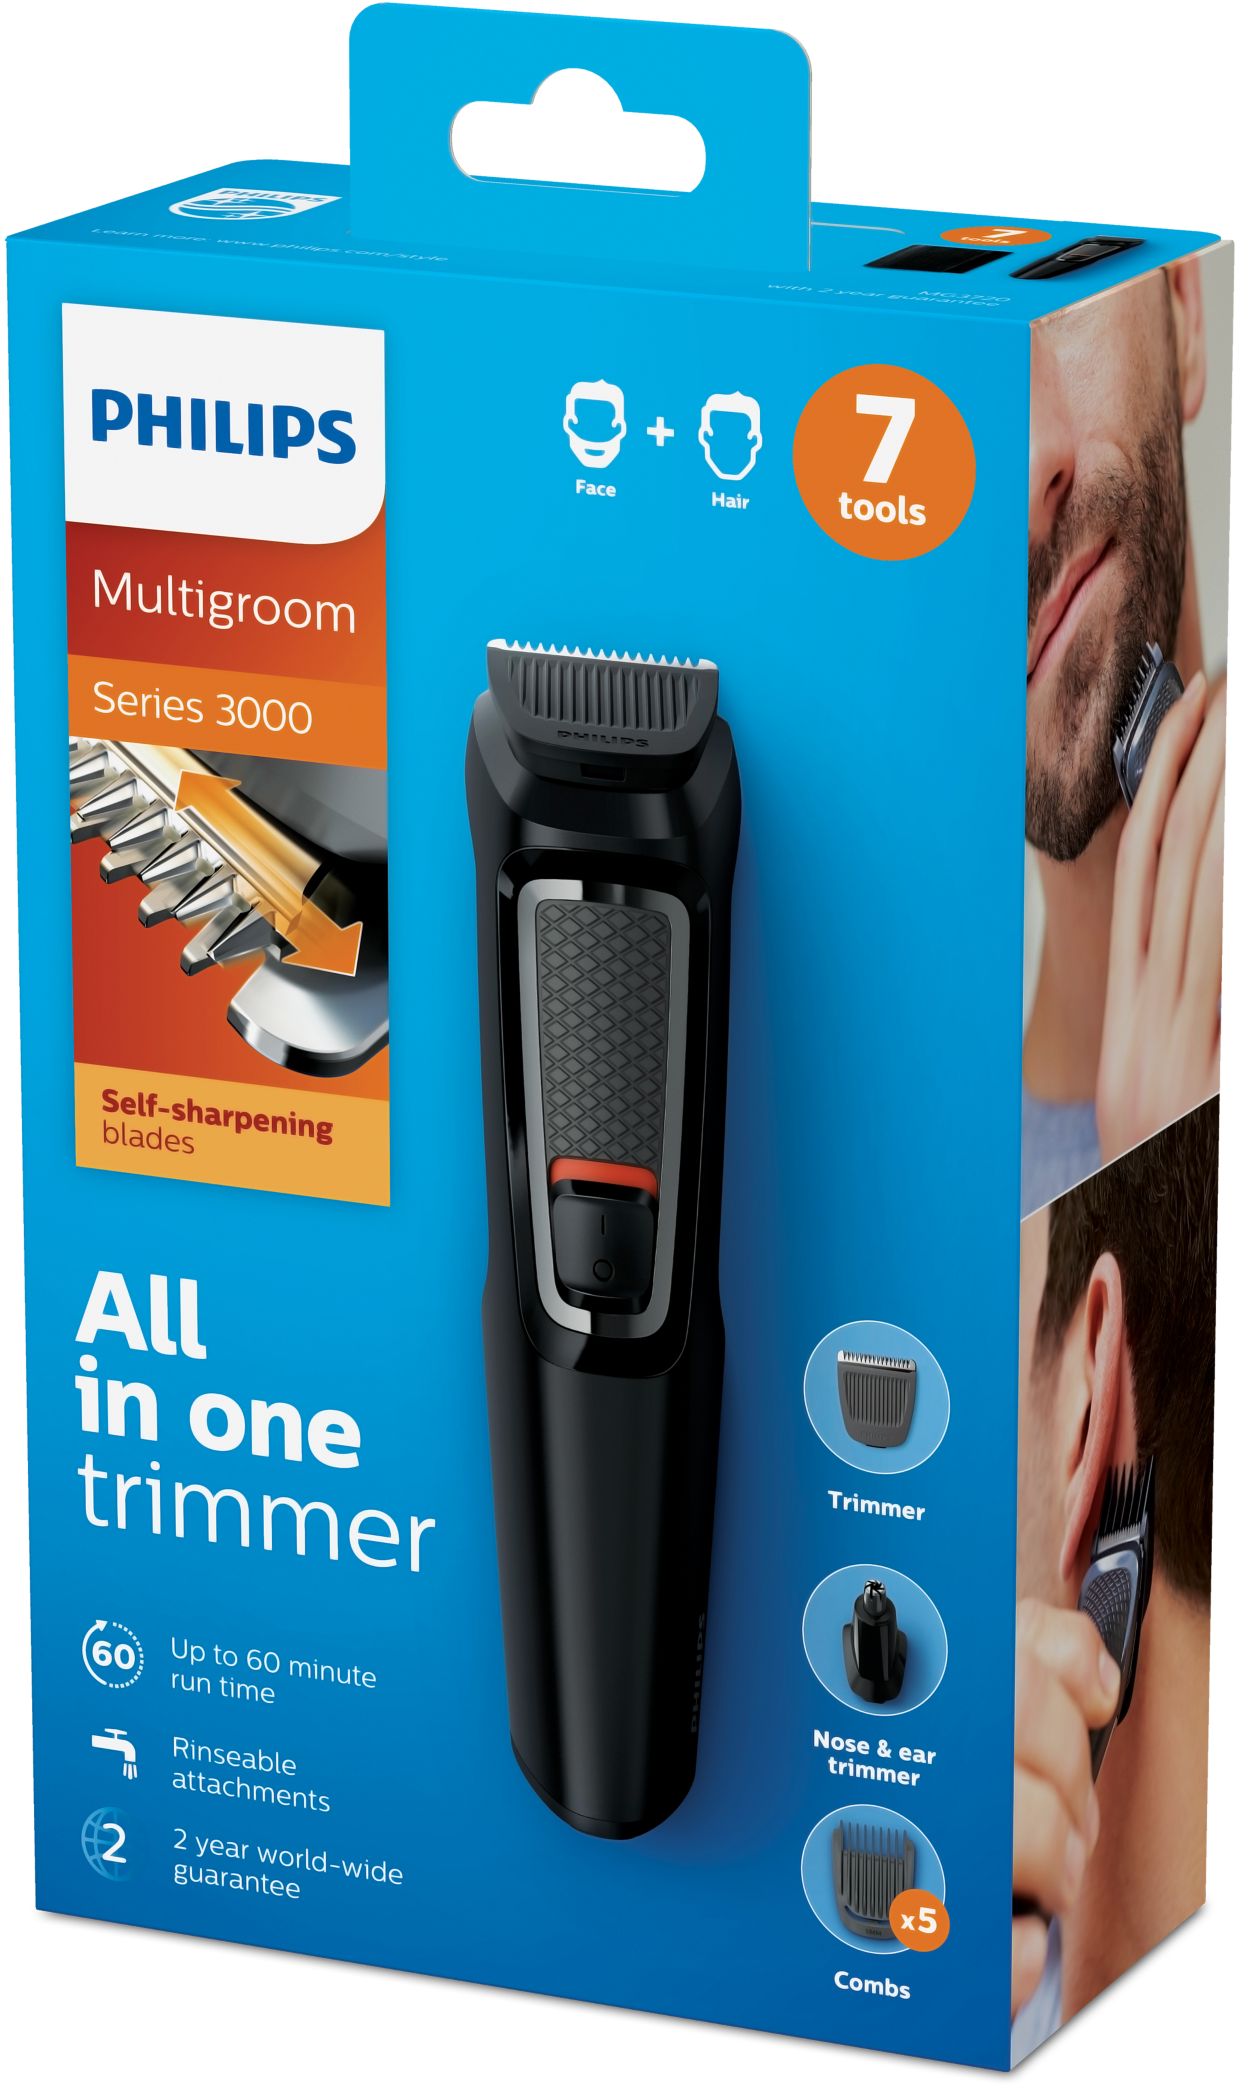 Multigroom series 3000 7-in-1, Face | MG3720/33 Philips and Hair